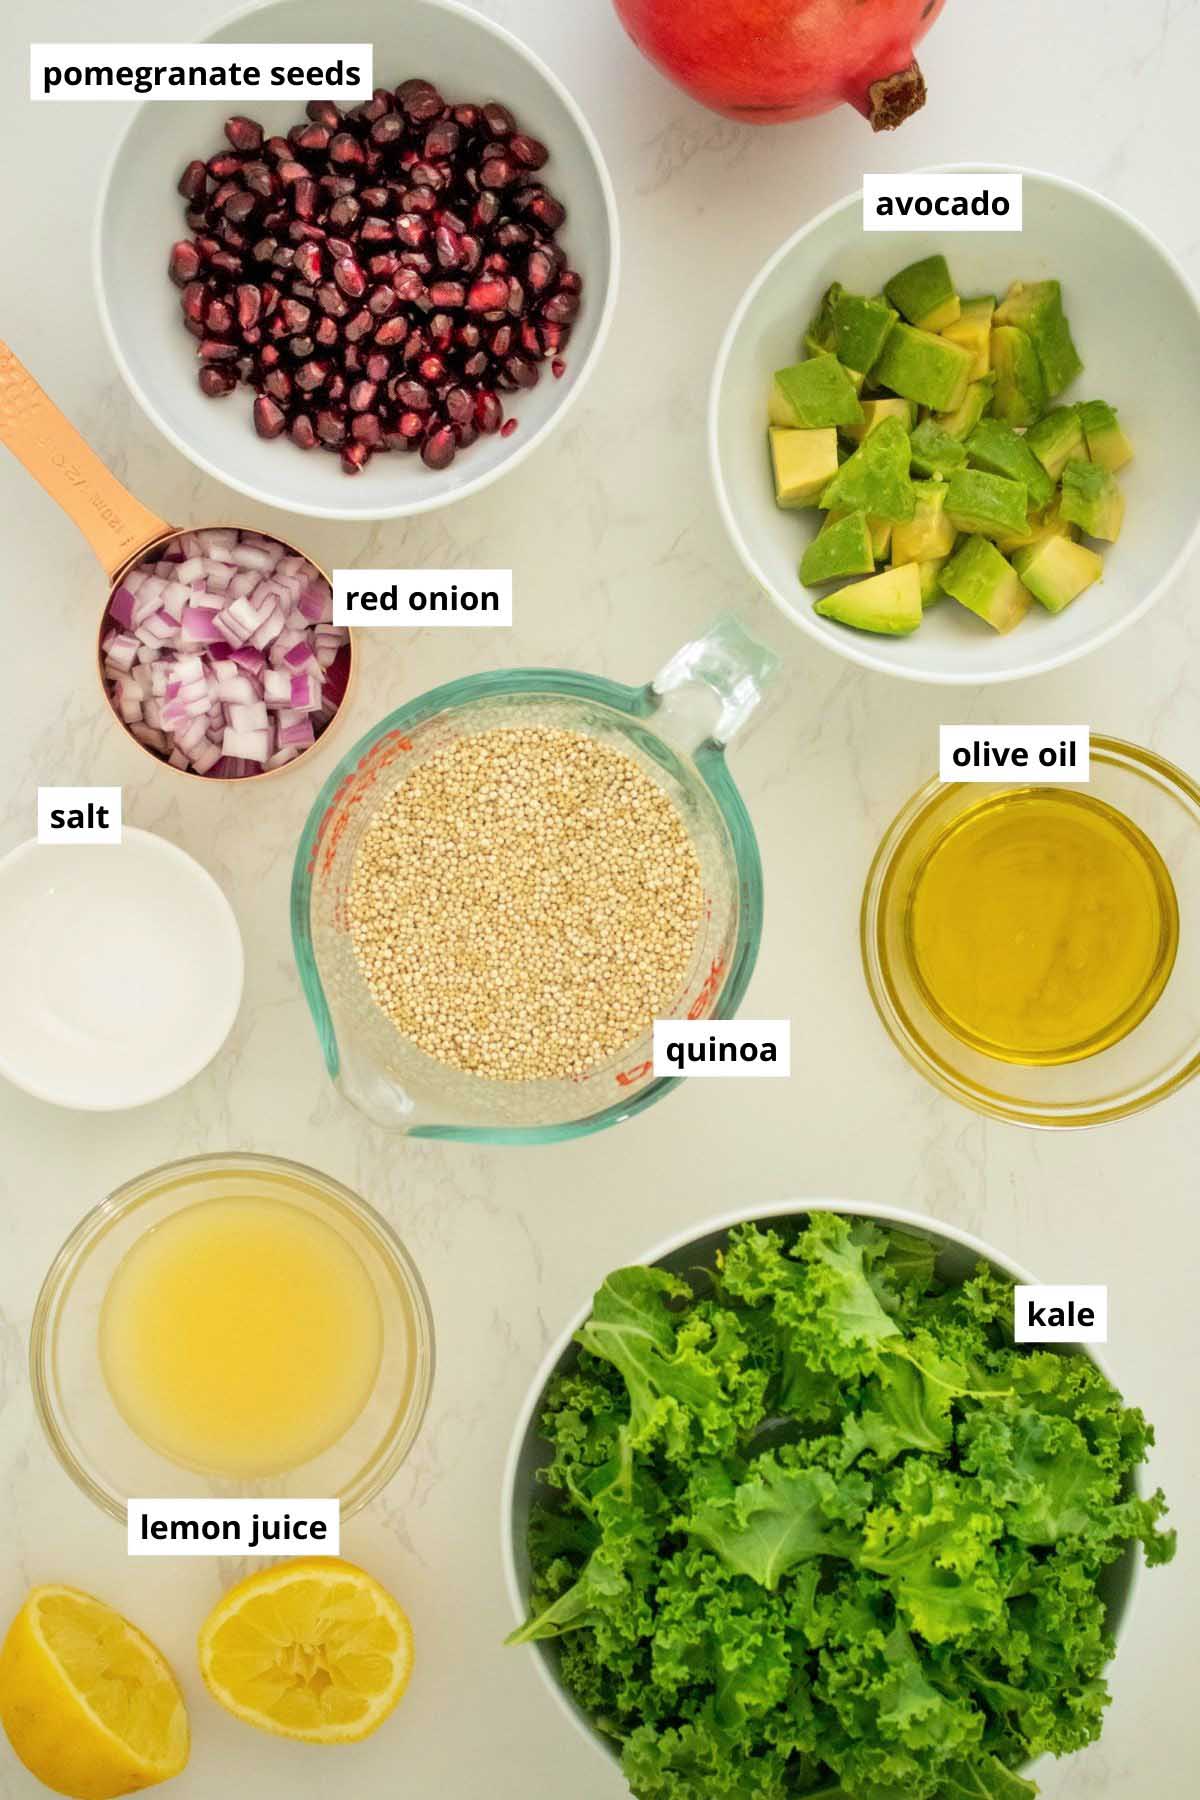 quinoa, kale, onion, avocado, olive oil, and lemon juice in bowls on a white table